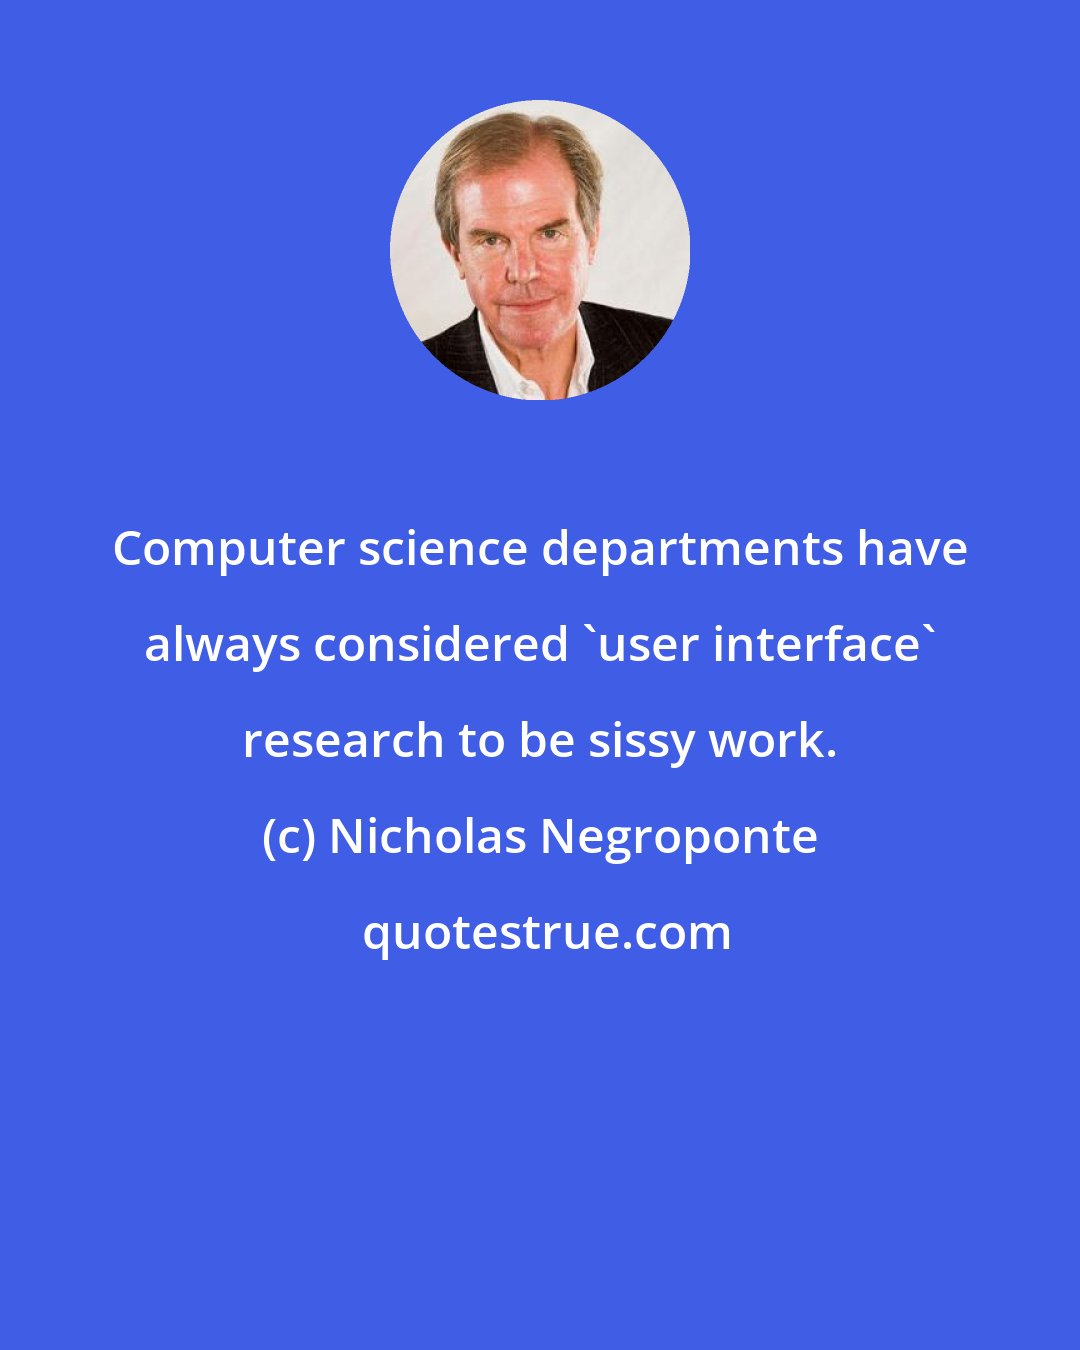 Nicholas Negroponte: Computer science departments have always considered 'user interface' research to be sissy work.